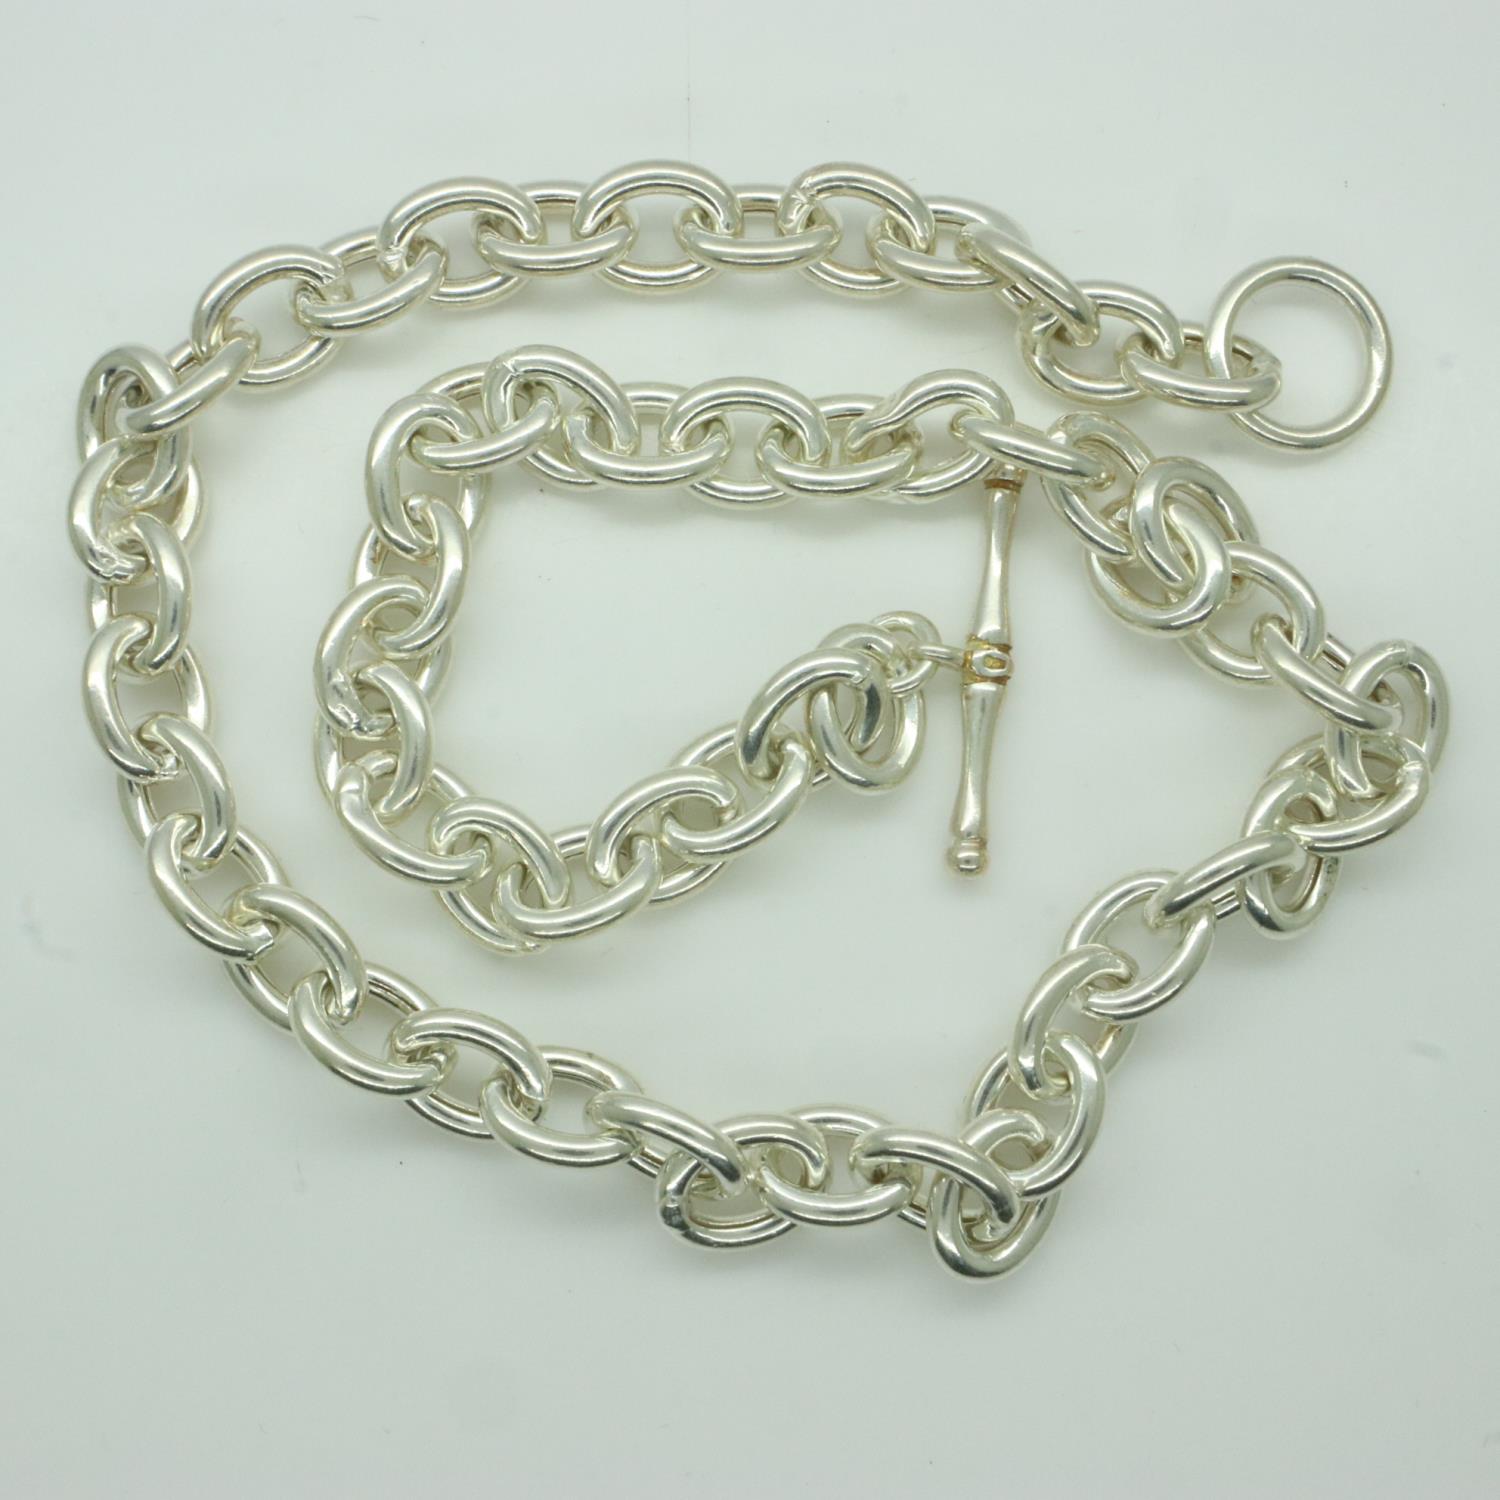 Silver T-bar necklace, L: 44 cm, 39g. UK P&P Group 0 (£6+VAT for the first lot and £1+VAT for